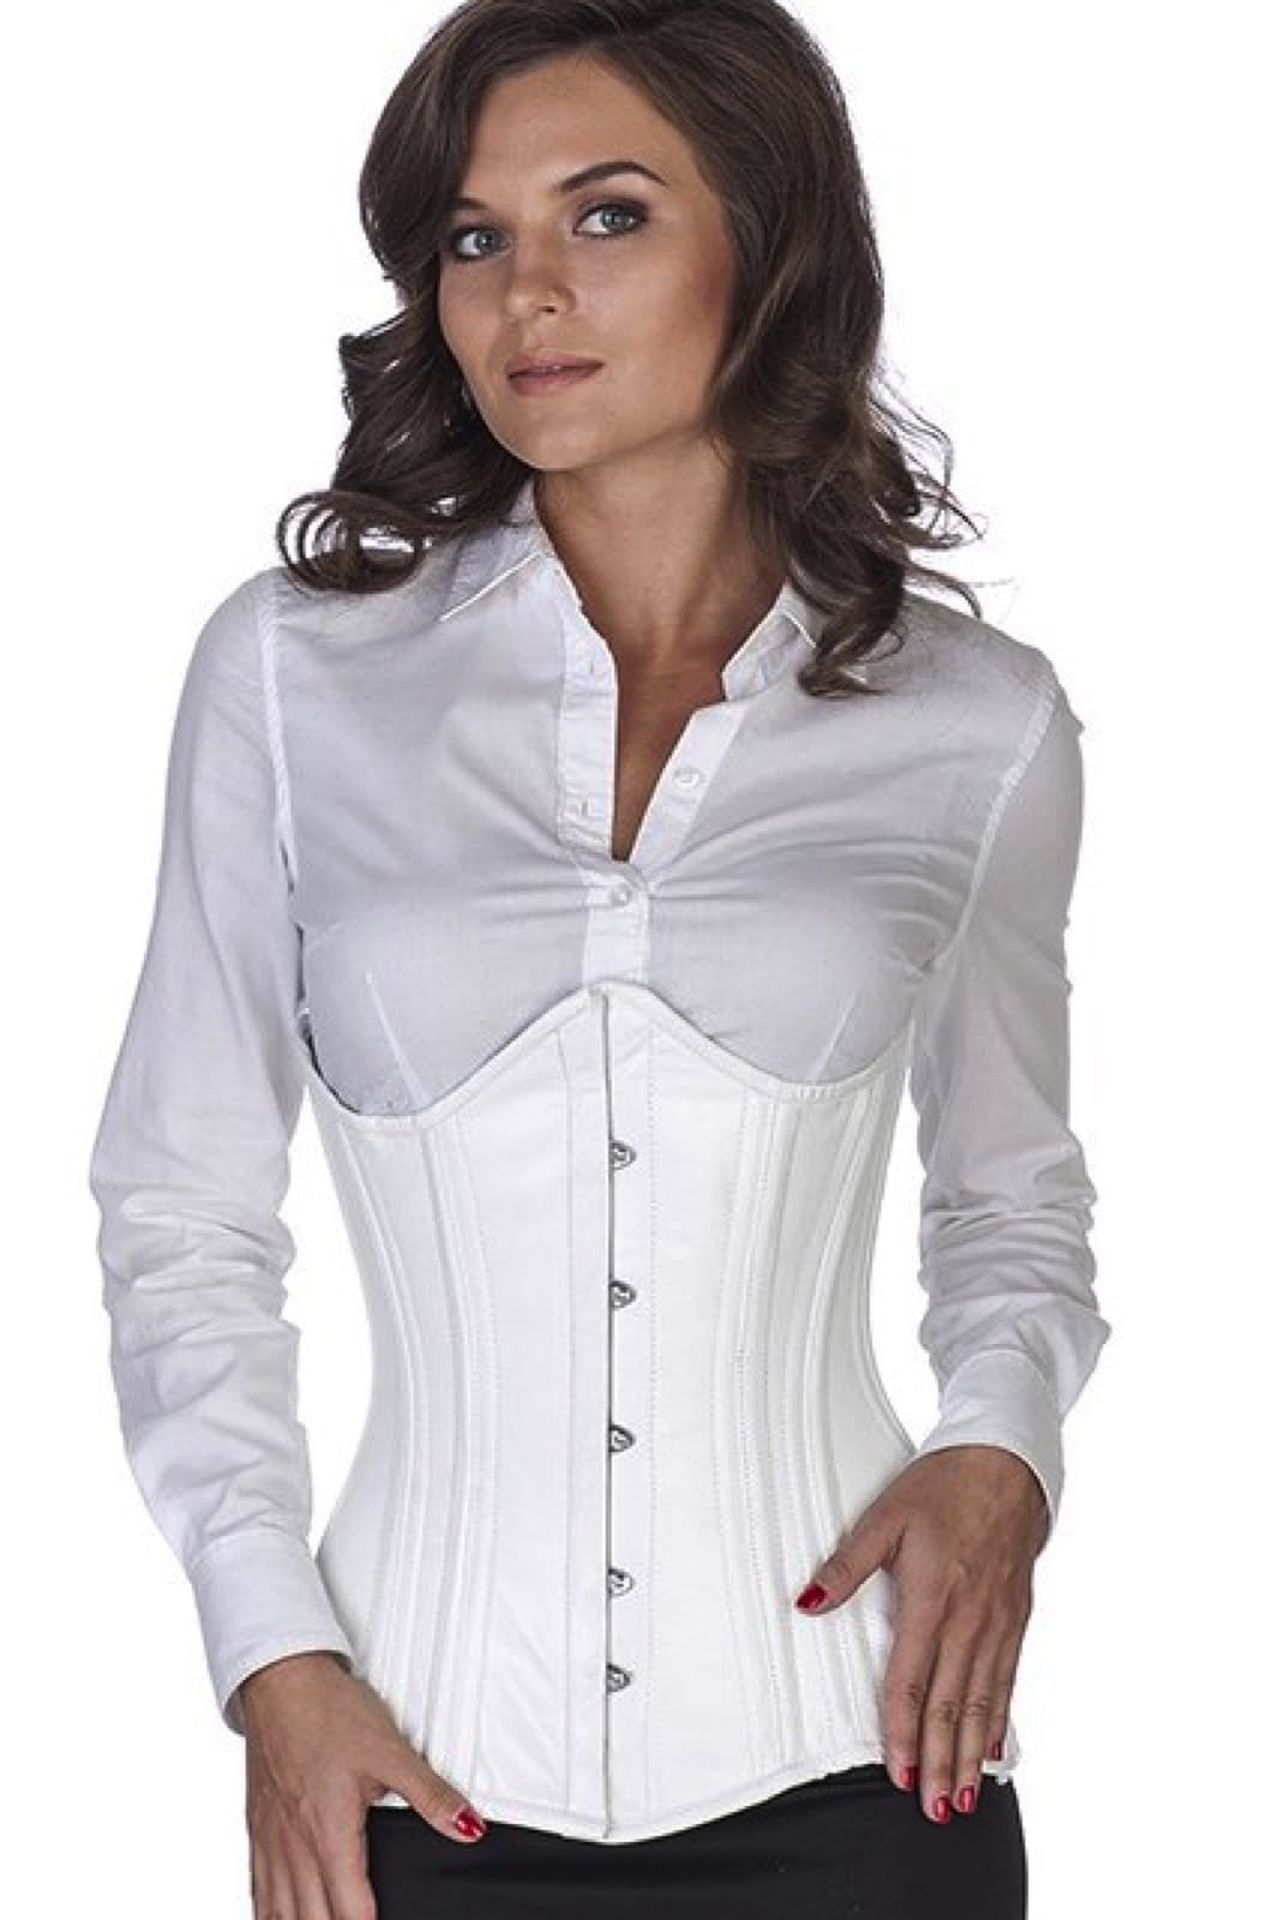 Corset white leather curved underbust ln21